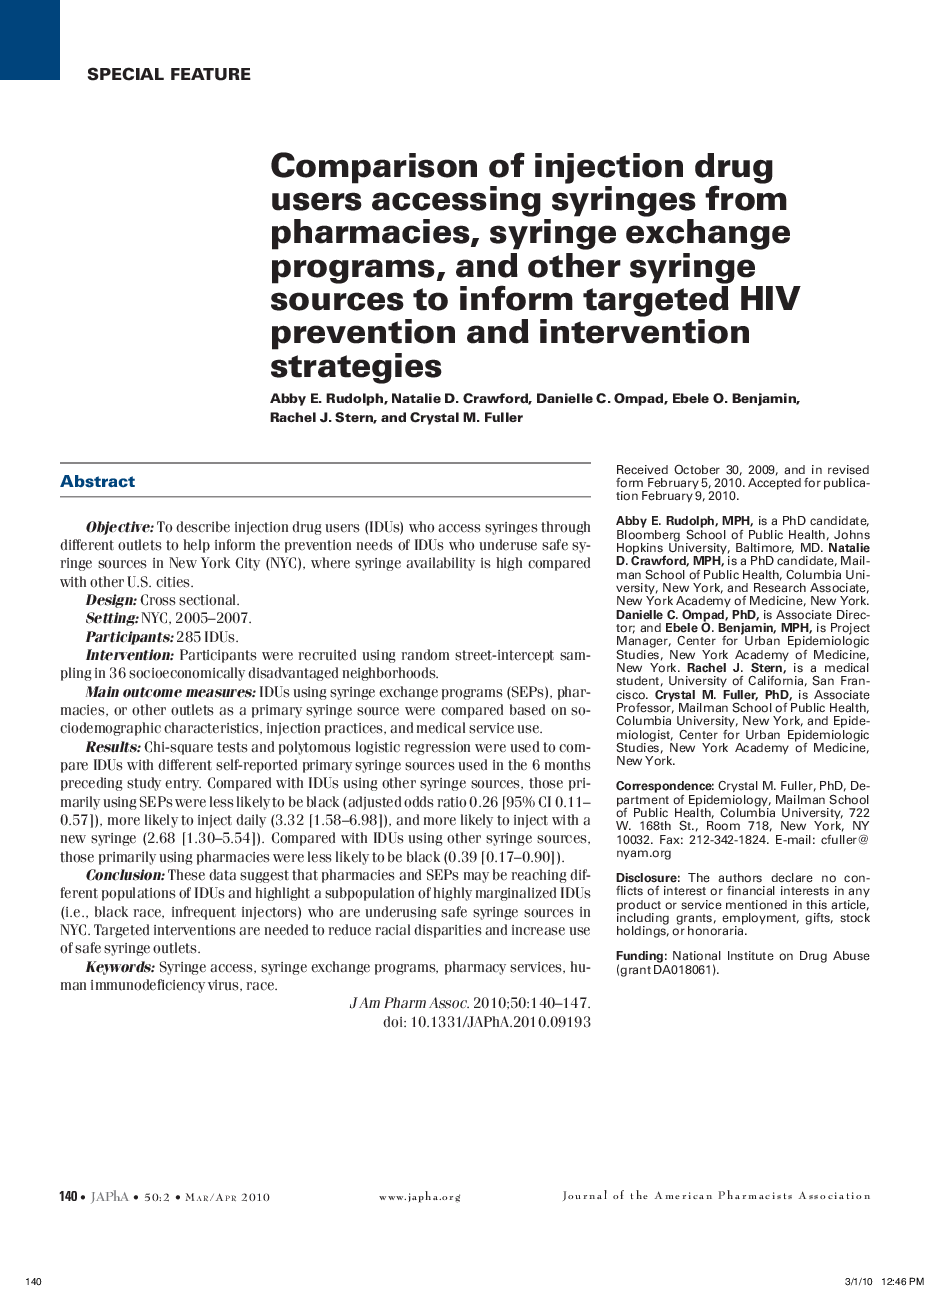 Comparison of injection drug users accessing syringes from pharmacies, syringe exchange programs, and other syringe sources to inform targeted HIV prevention and intervention strategies